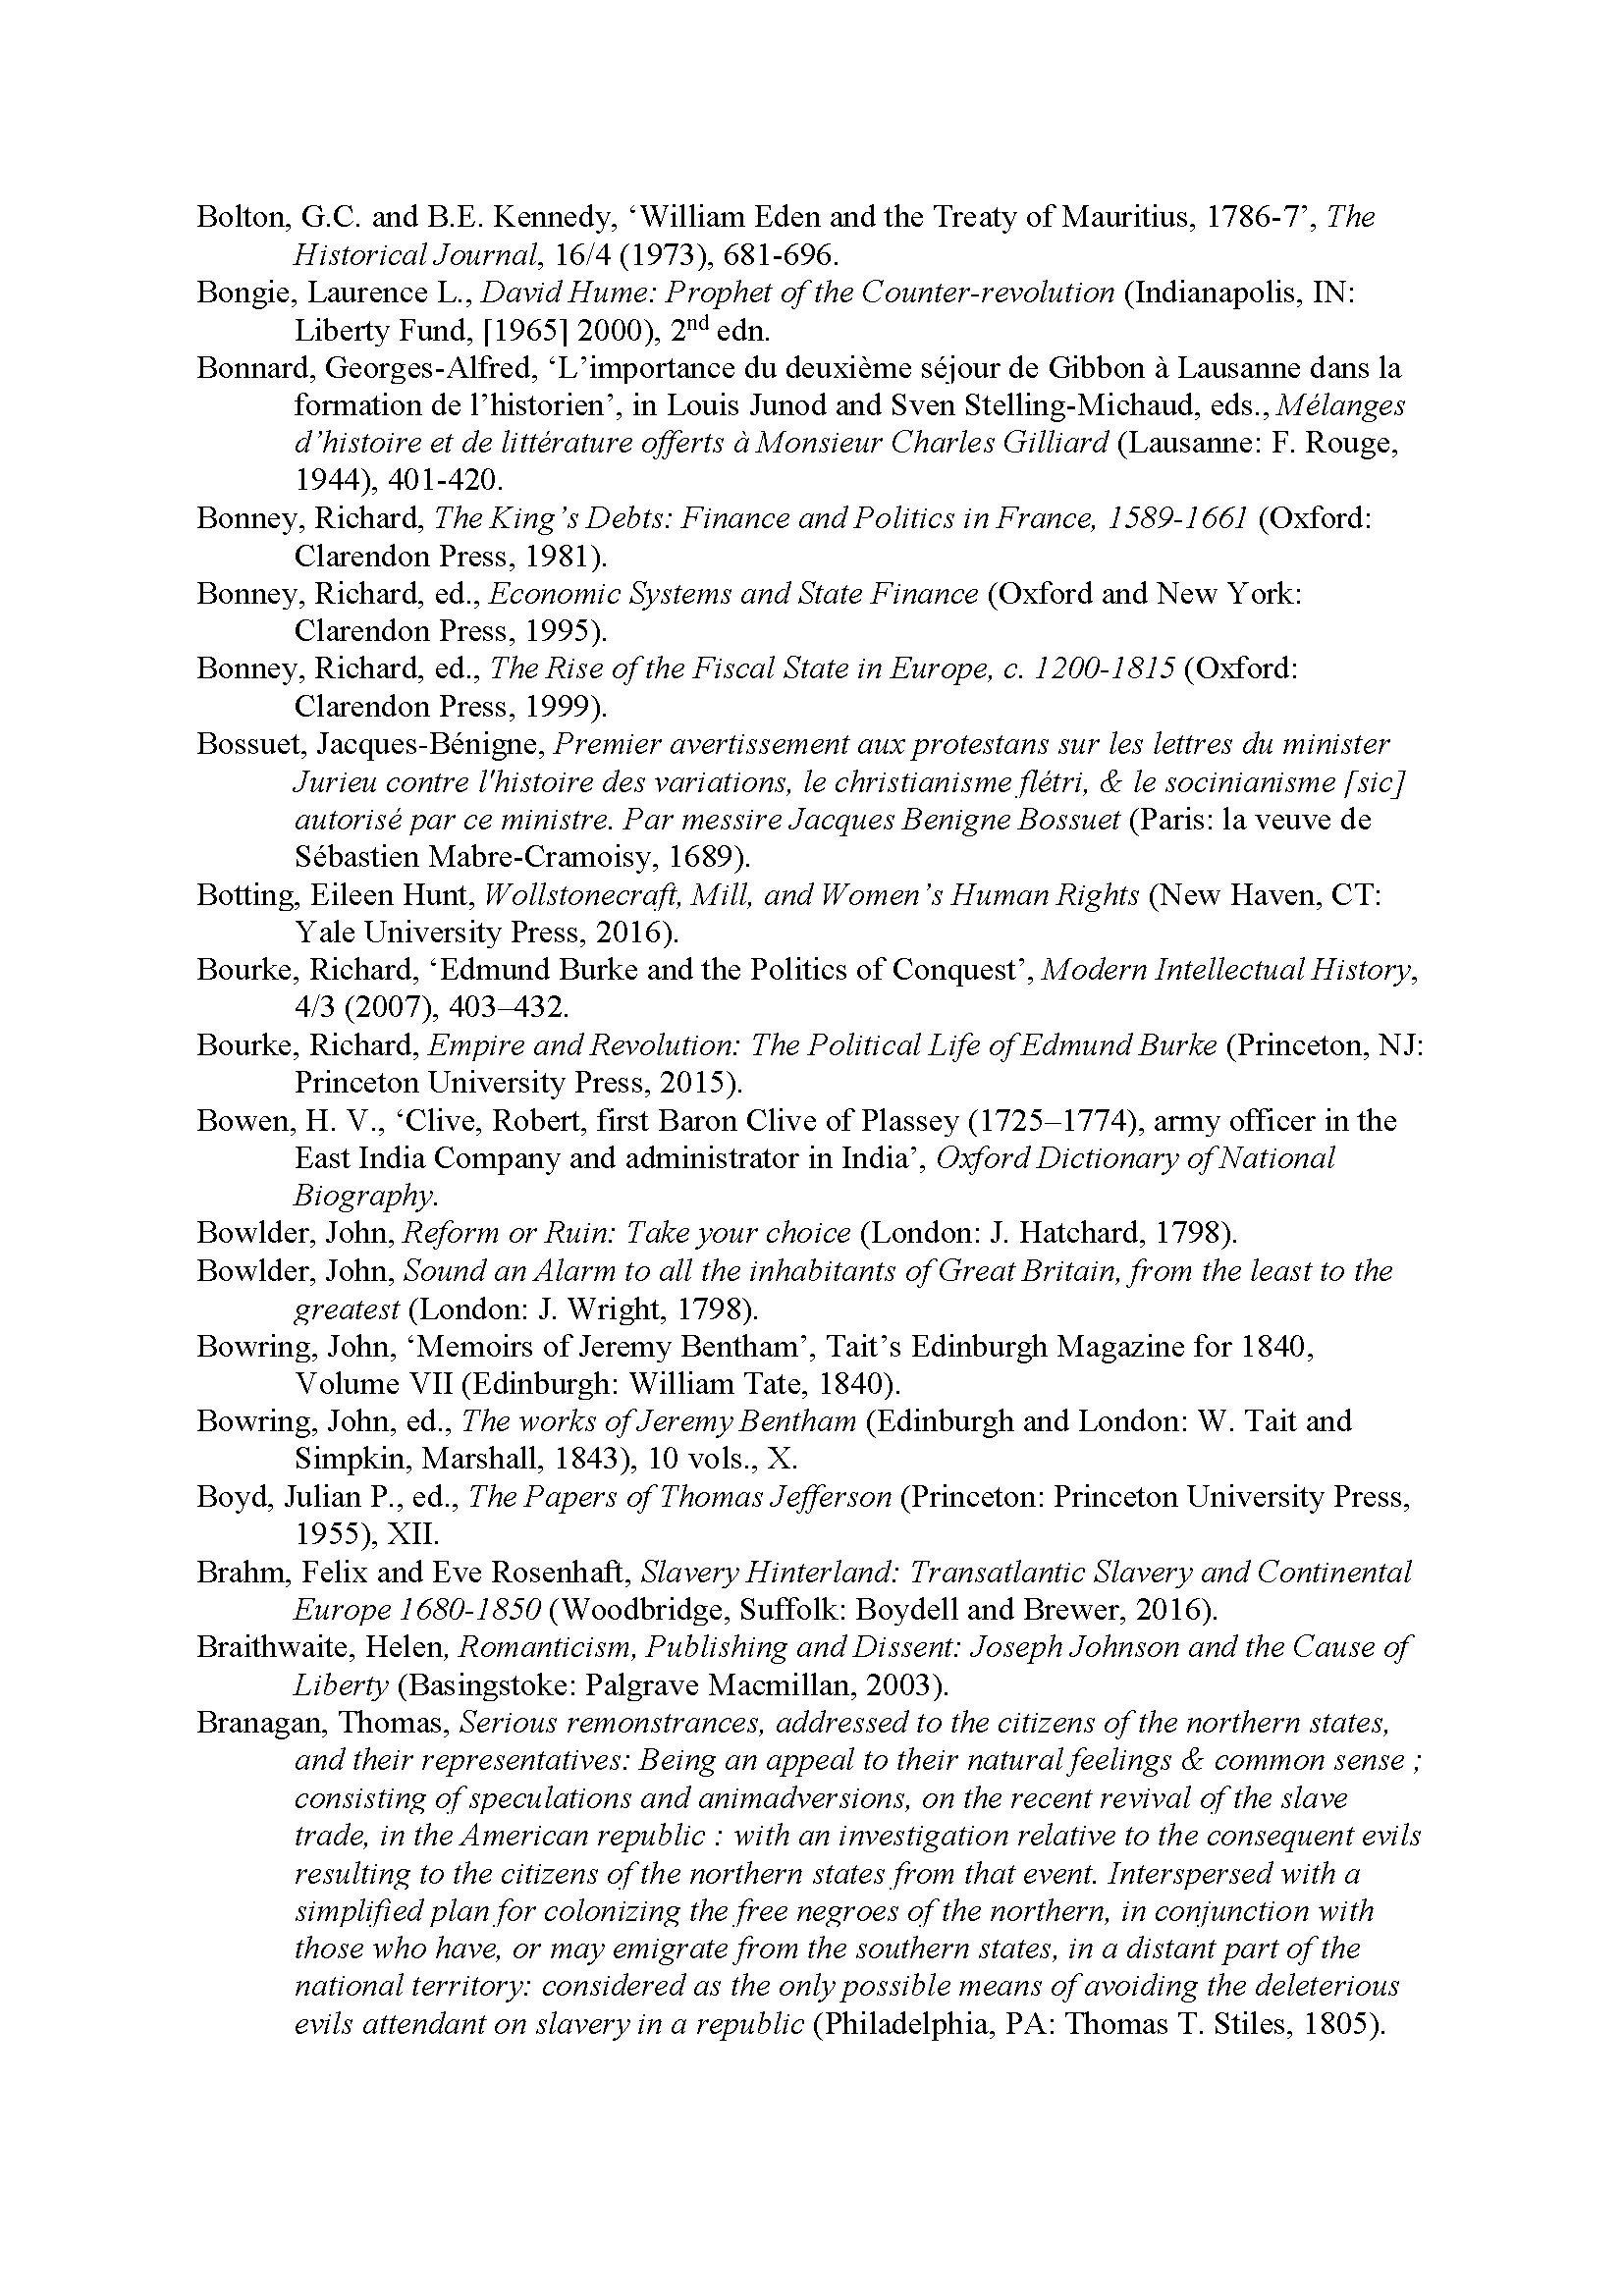 End of the Enlightment_Bibliography[25]_Page_05.jpg